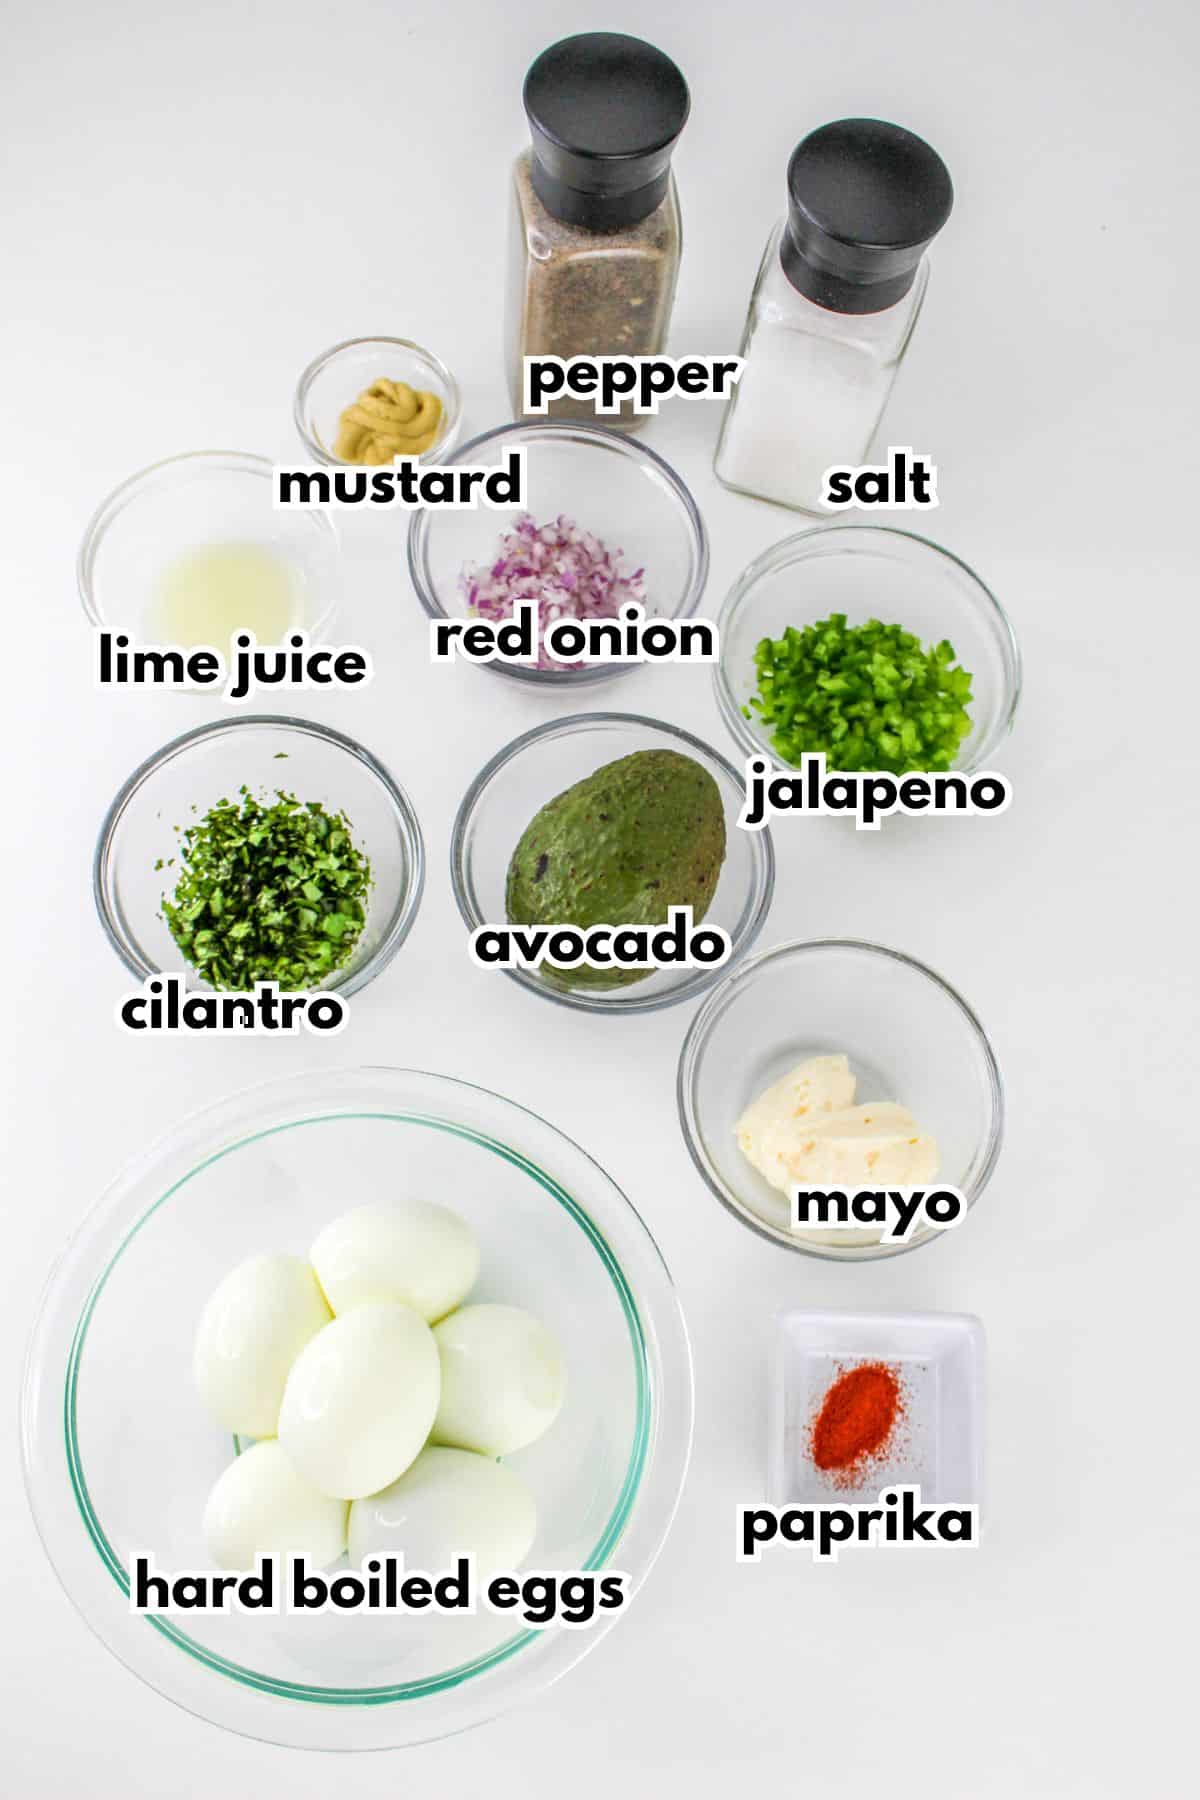 bowls of mustard, lime juice, cilantro, red onion, avocado, jalapeno, hard boiled eggs, mayo, paprika, pepper and salt.